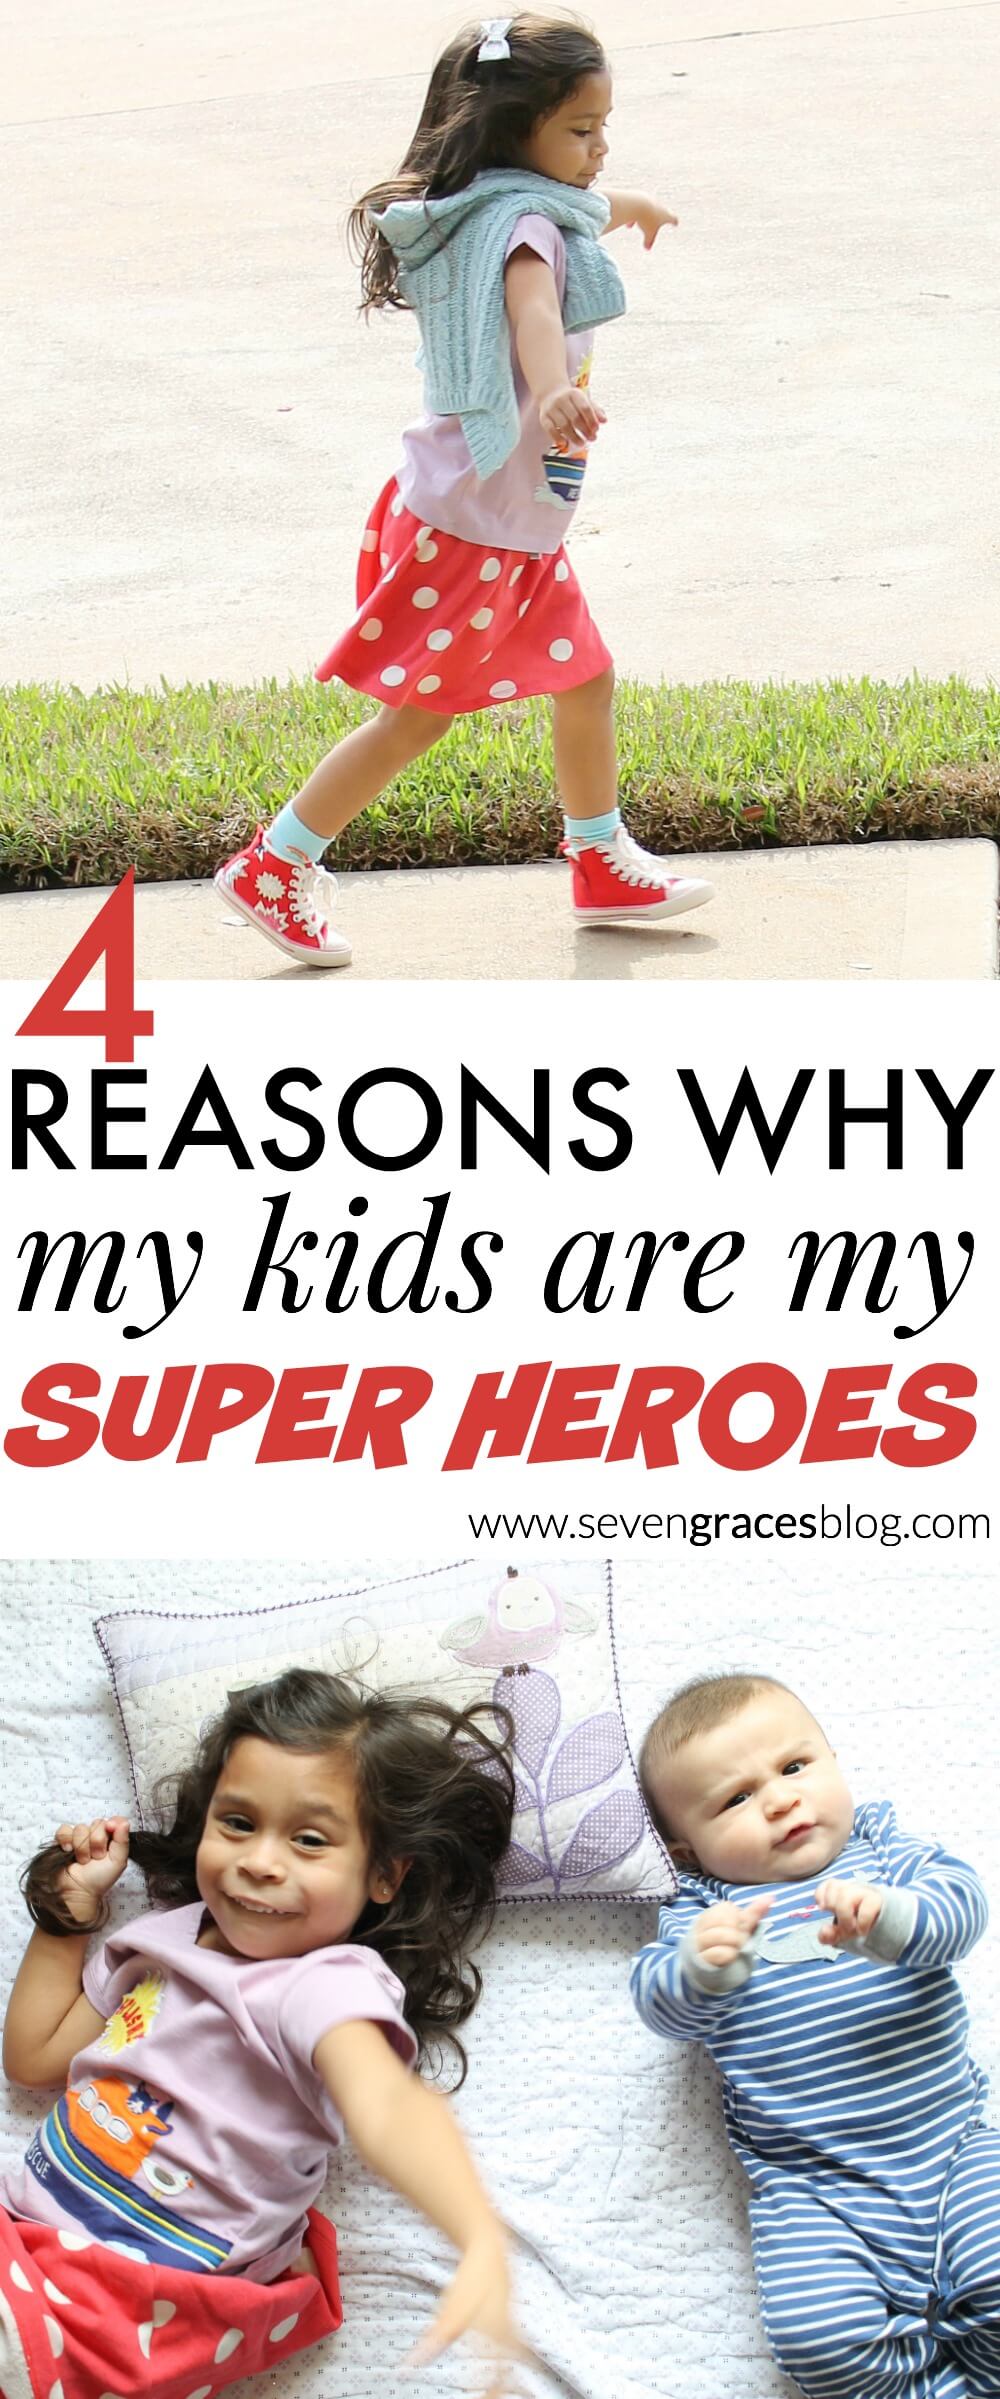 4 reasons why kids are my super heroes. #minibodentotherescue